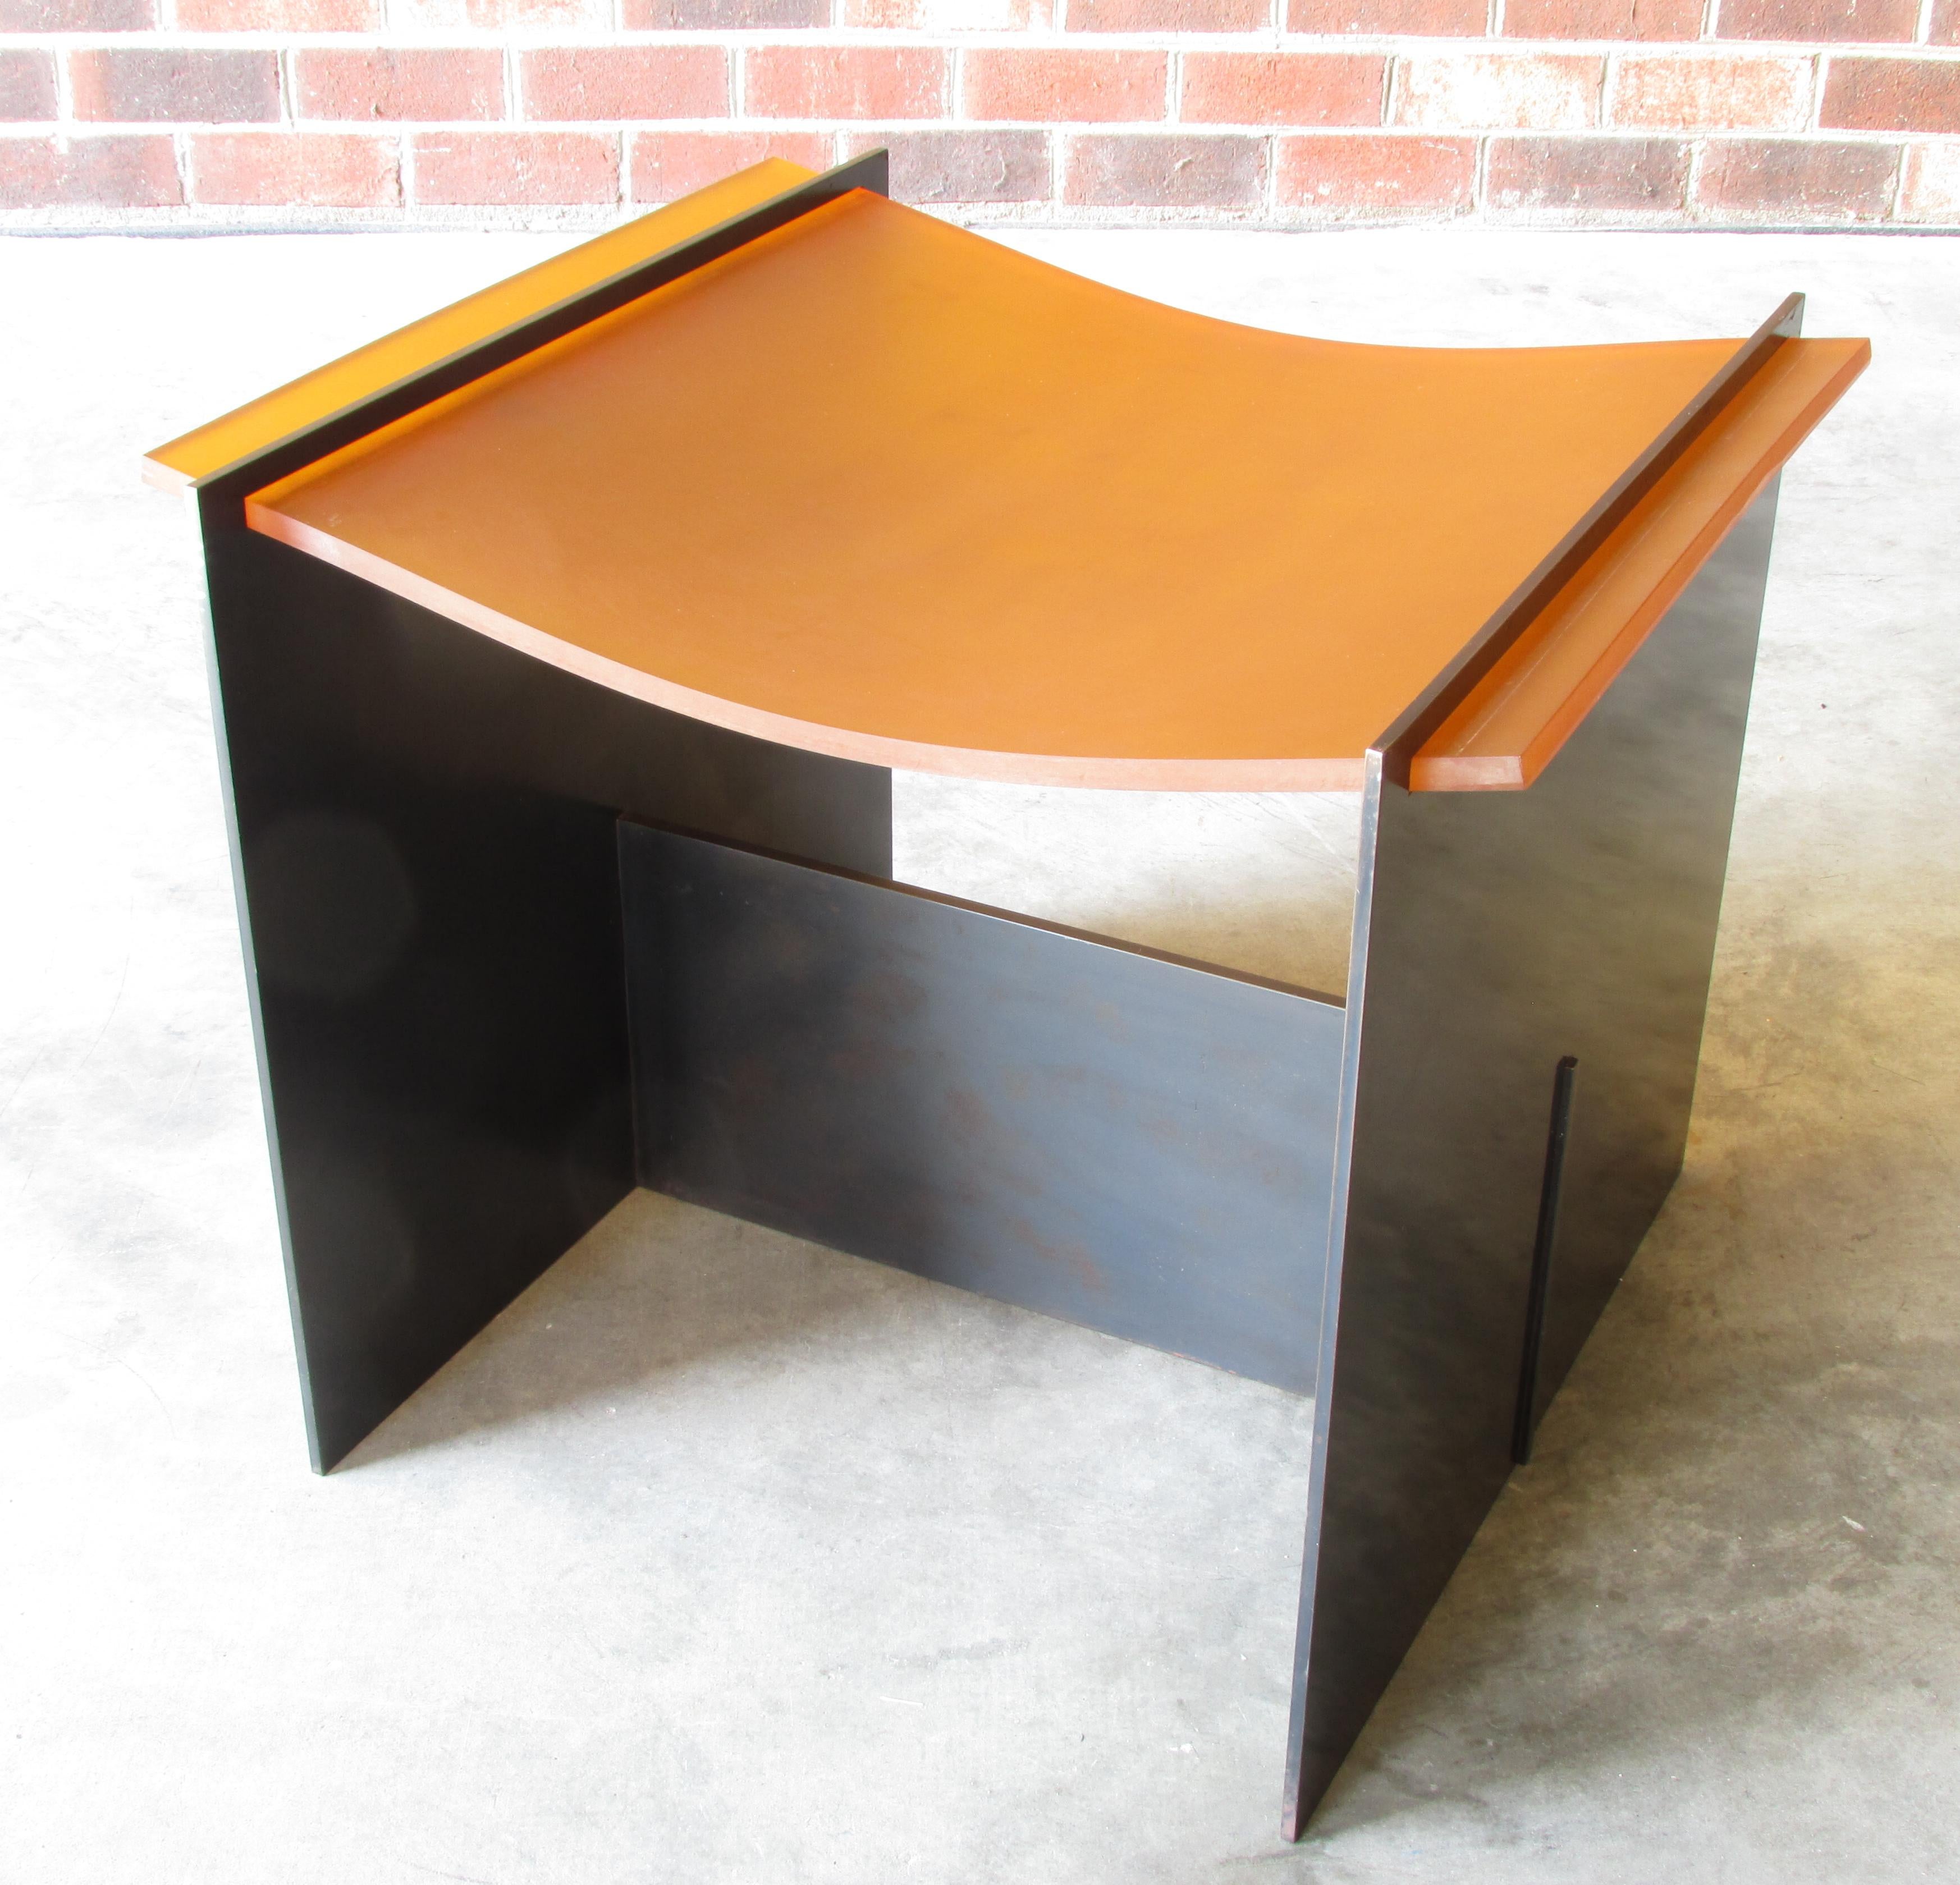 Minimalist simple style stool or seat made of blackened steel and suspended rubber seat by David Gulasso.